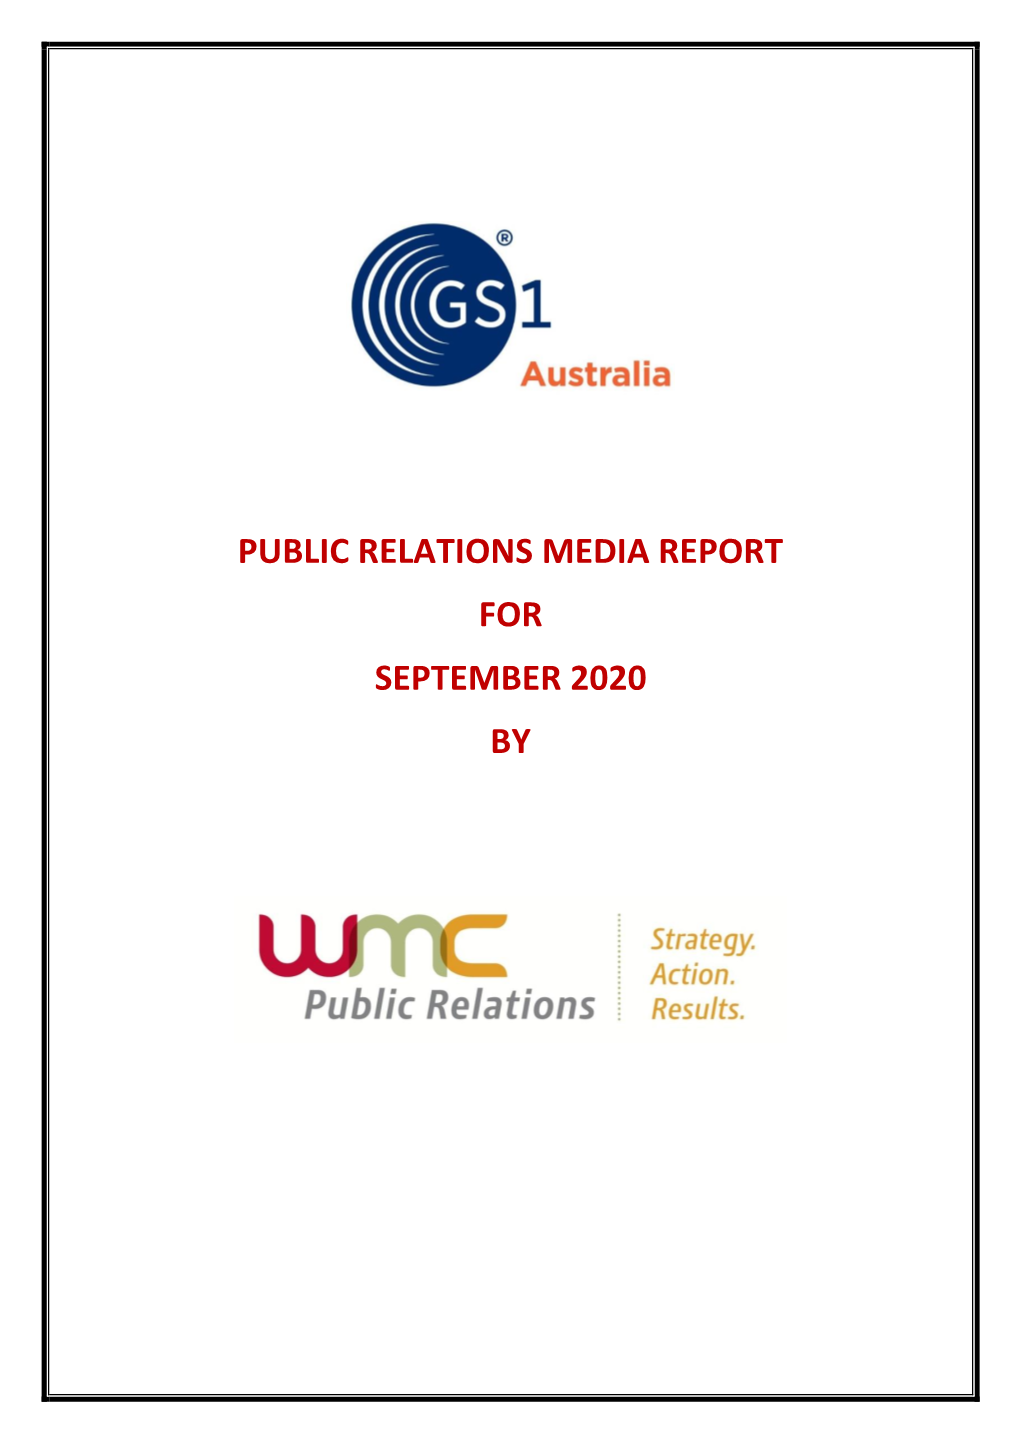 Public Relations Media Report for September 2020 By